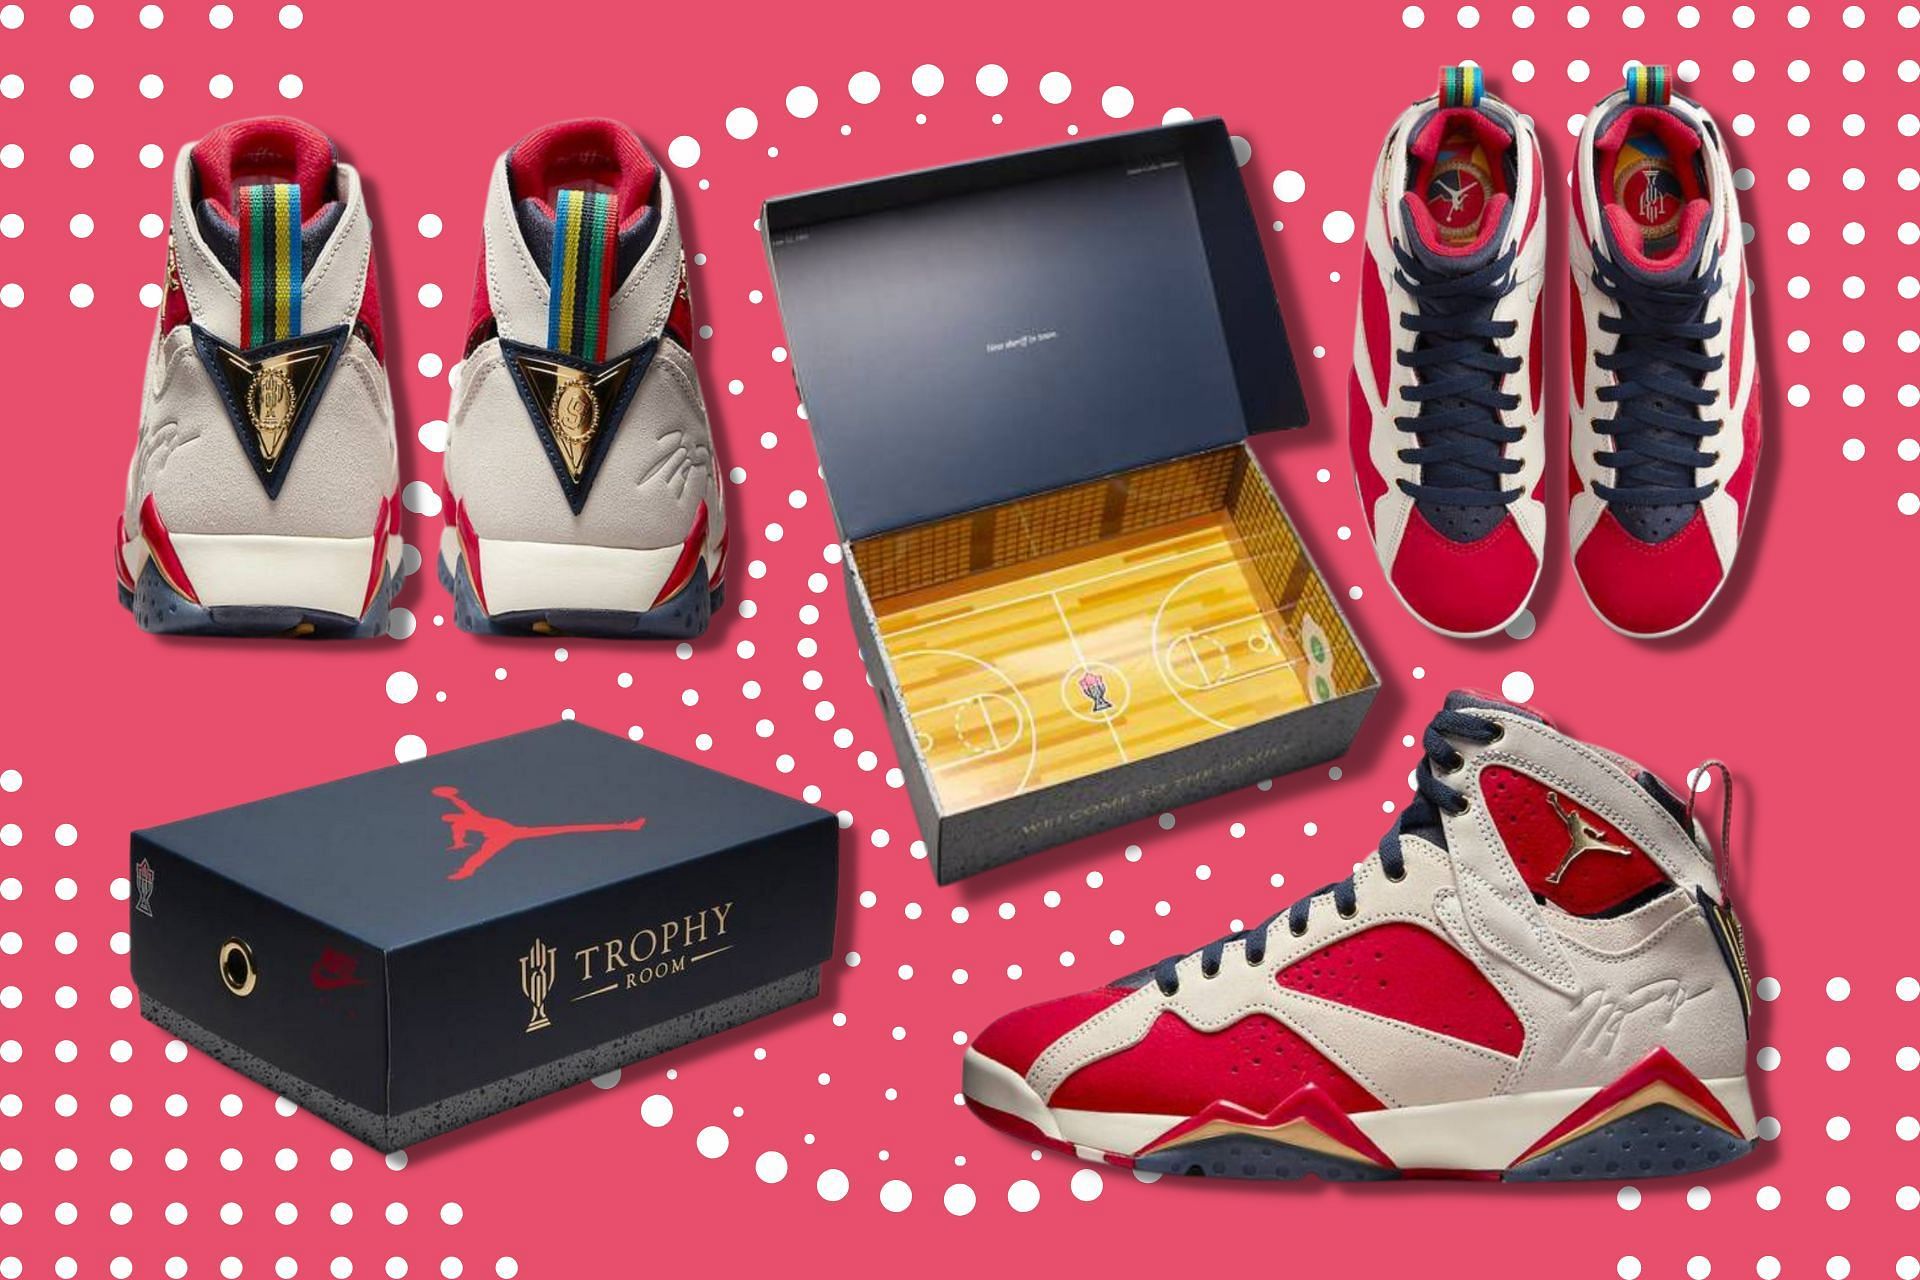 Where to buy Trophy Room x Air Jordan 7 shoes? Price and more details ...